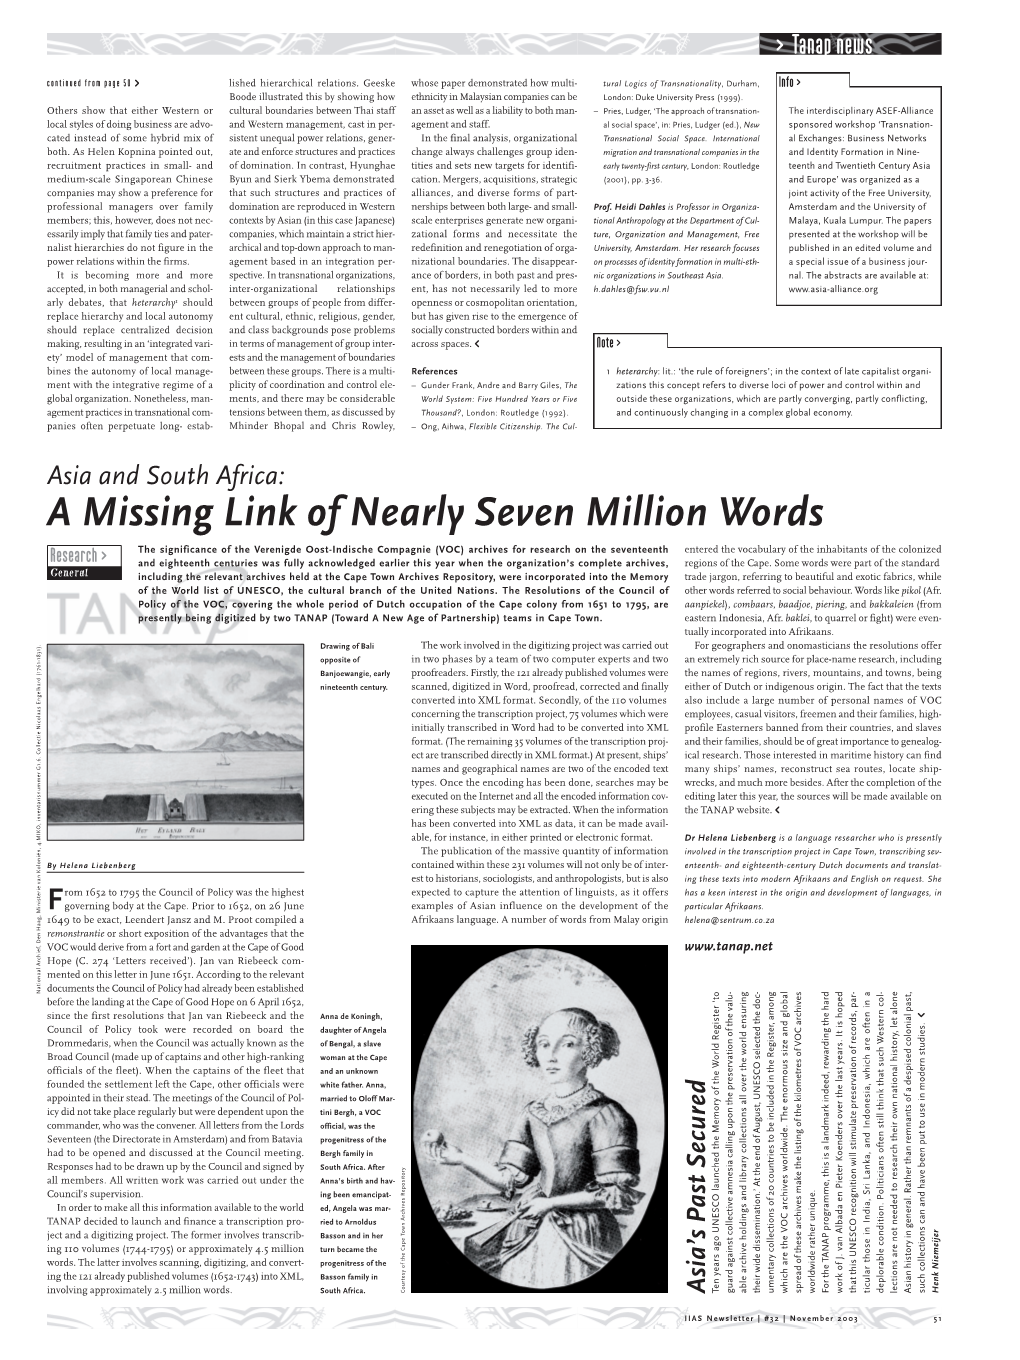 A Missing Link of Nearly Seven Million Words